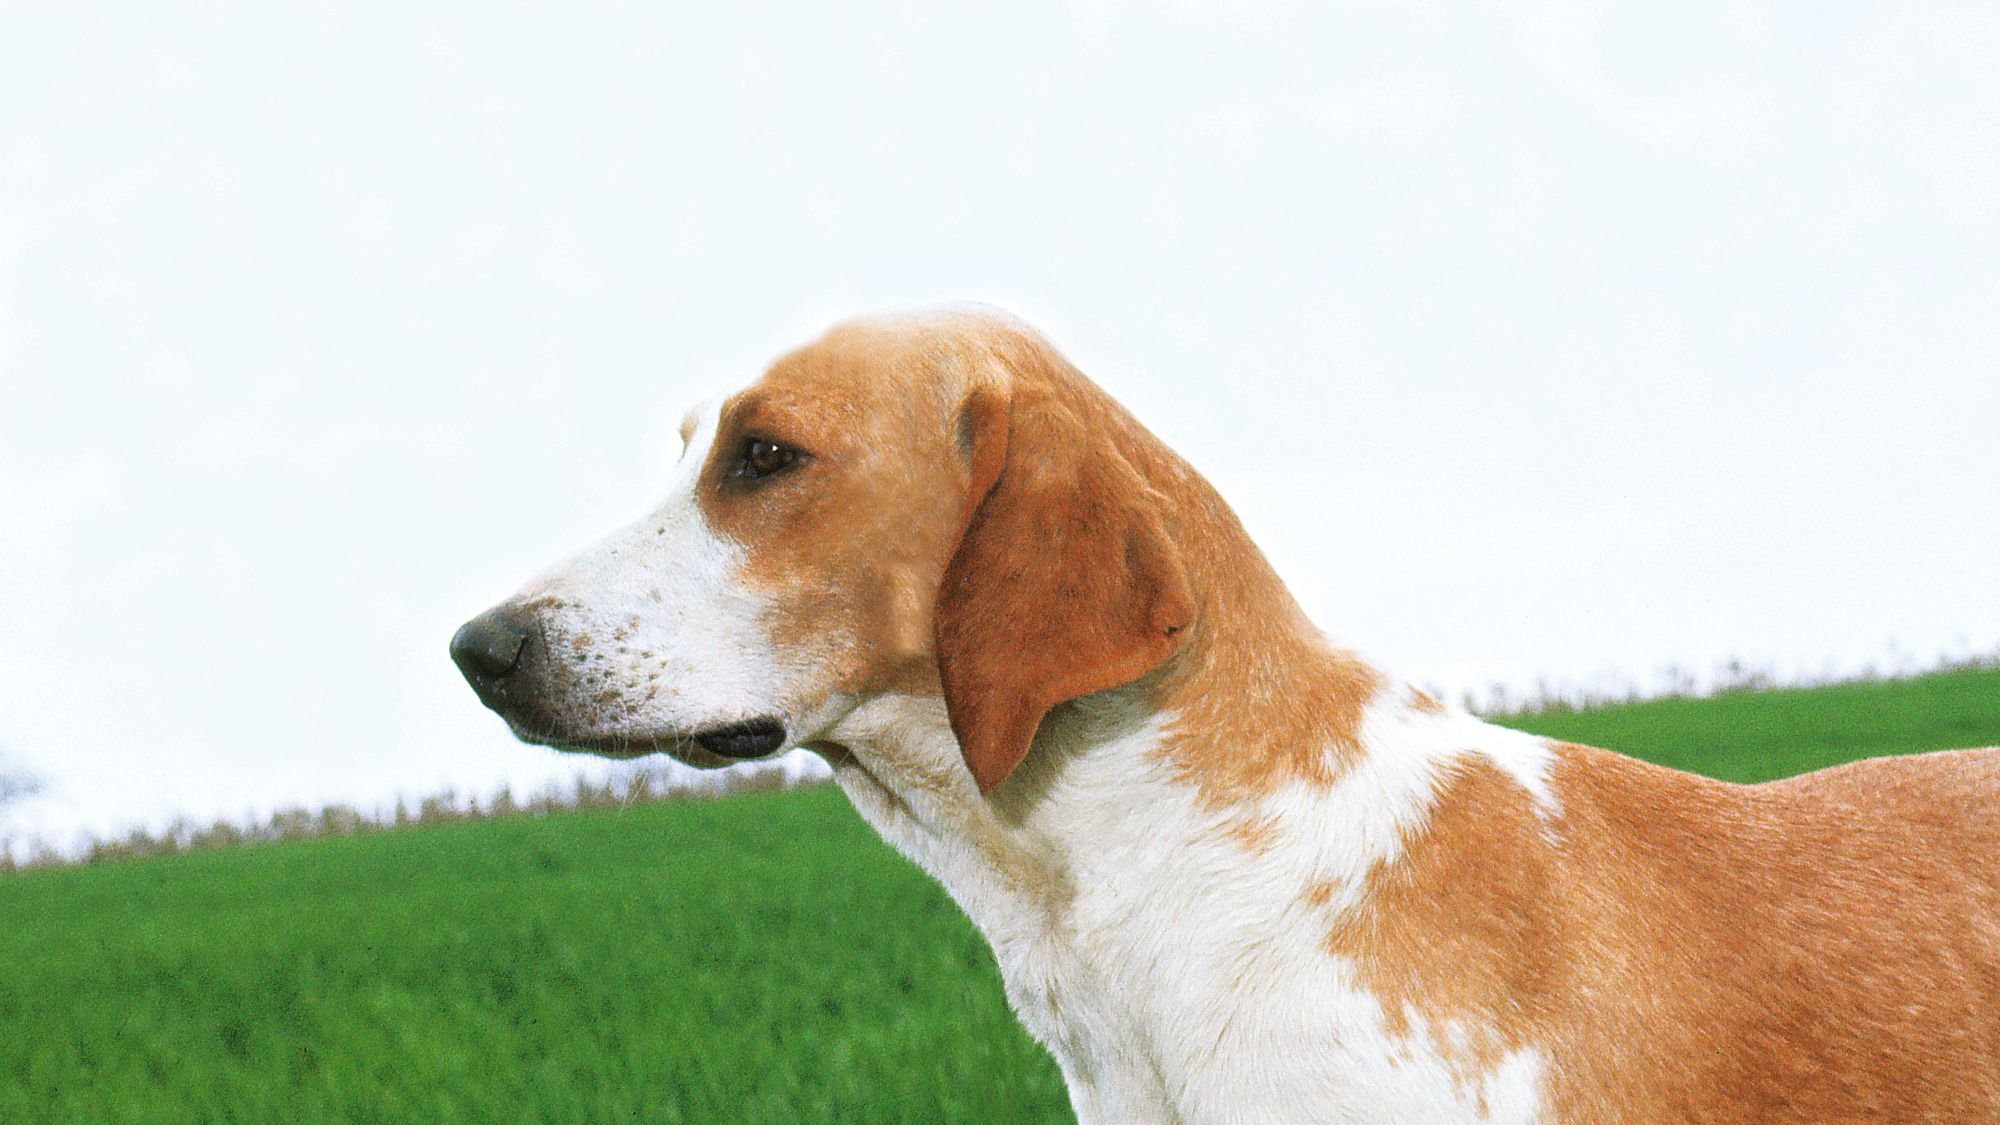 Great Angle Francais White and Orange Hound stood on grass, nose pointing to the side